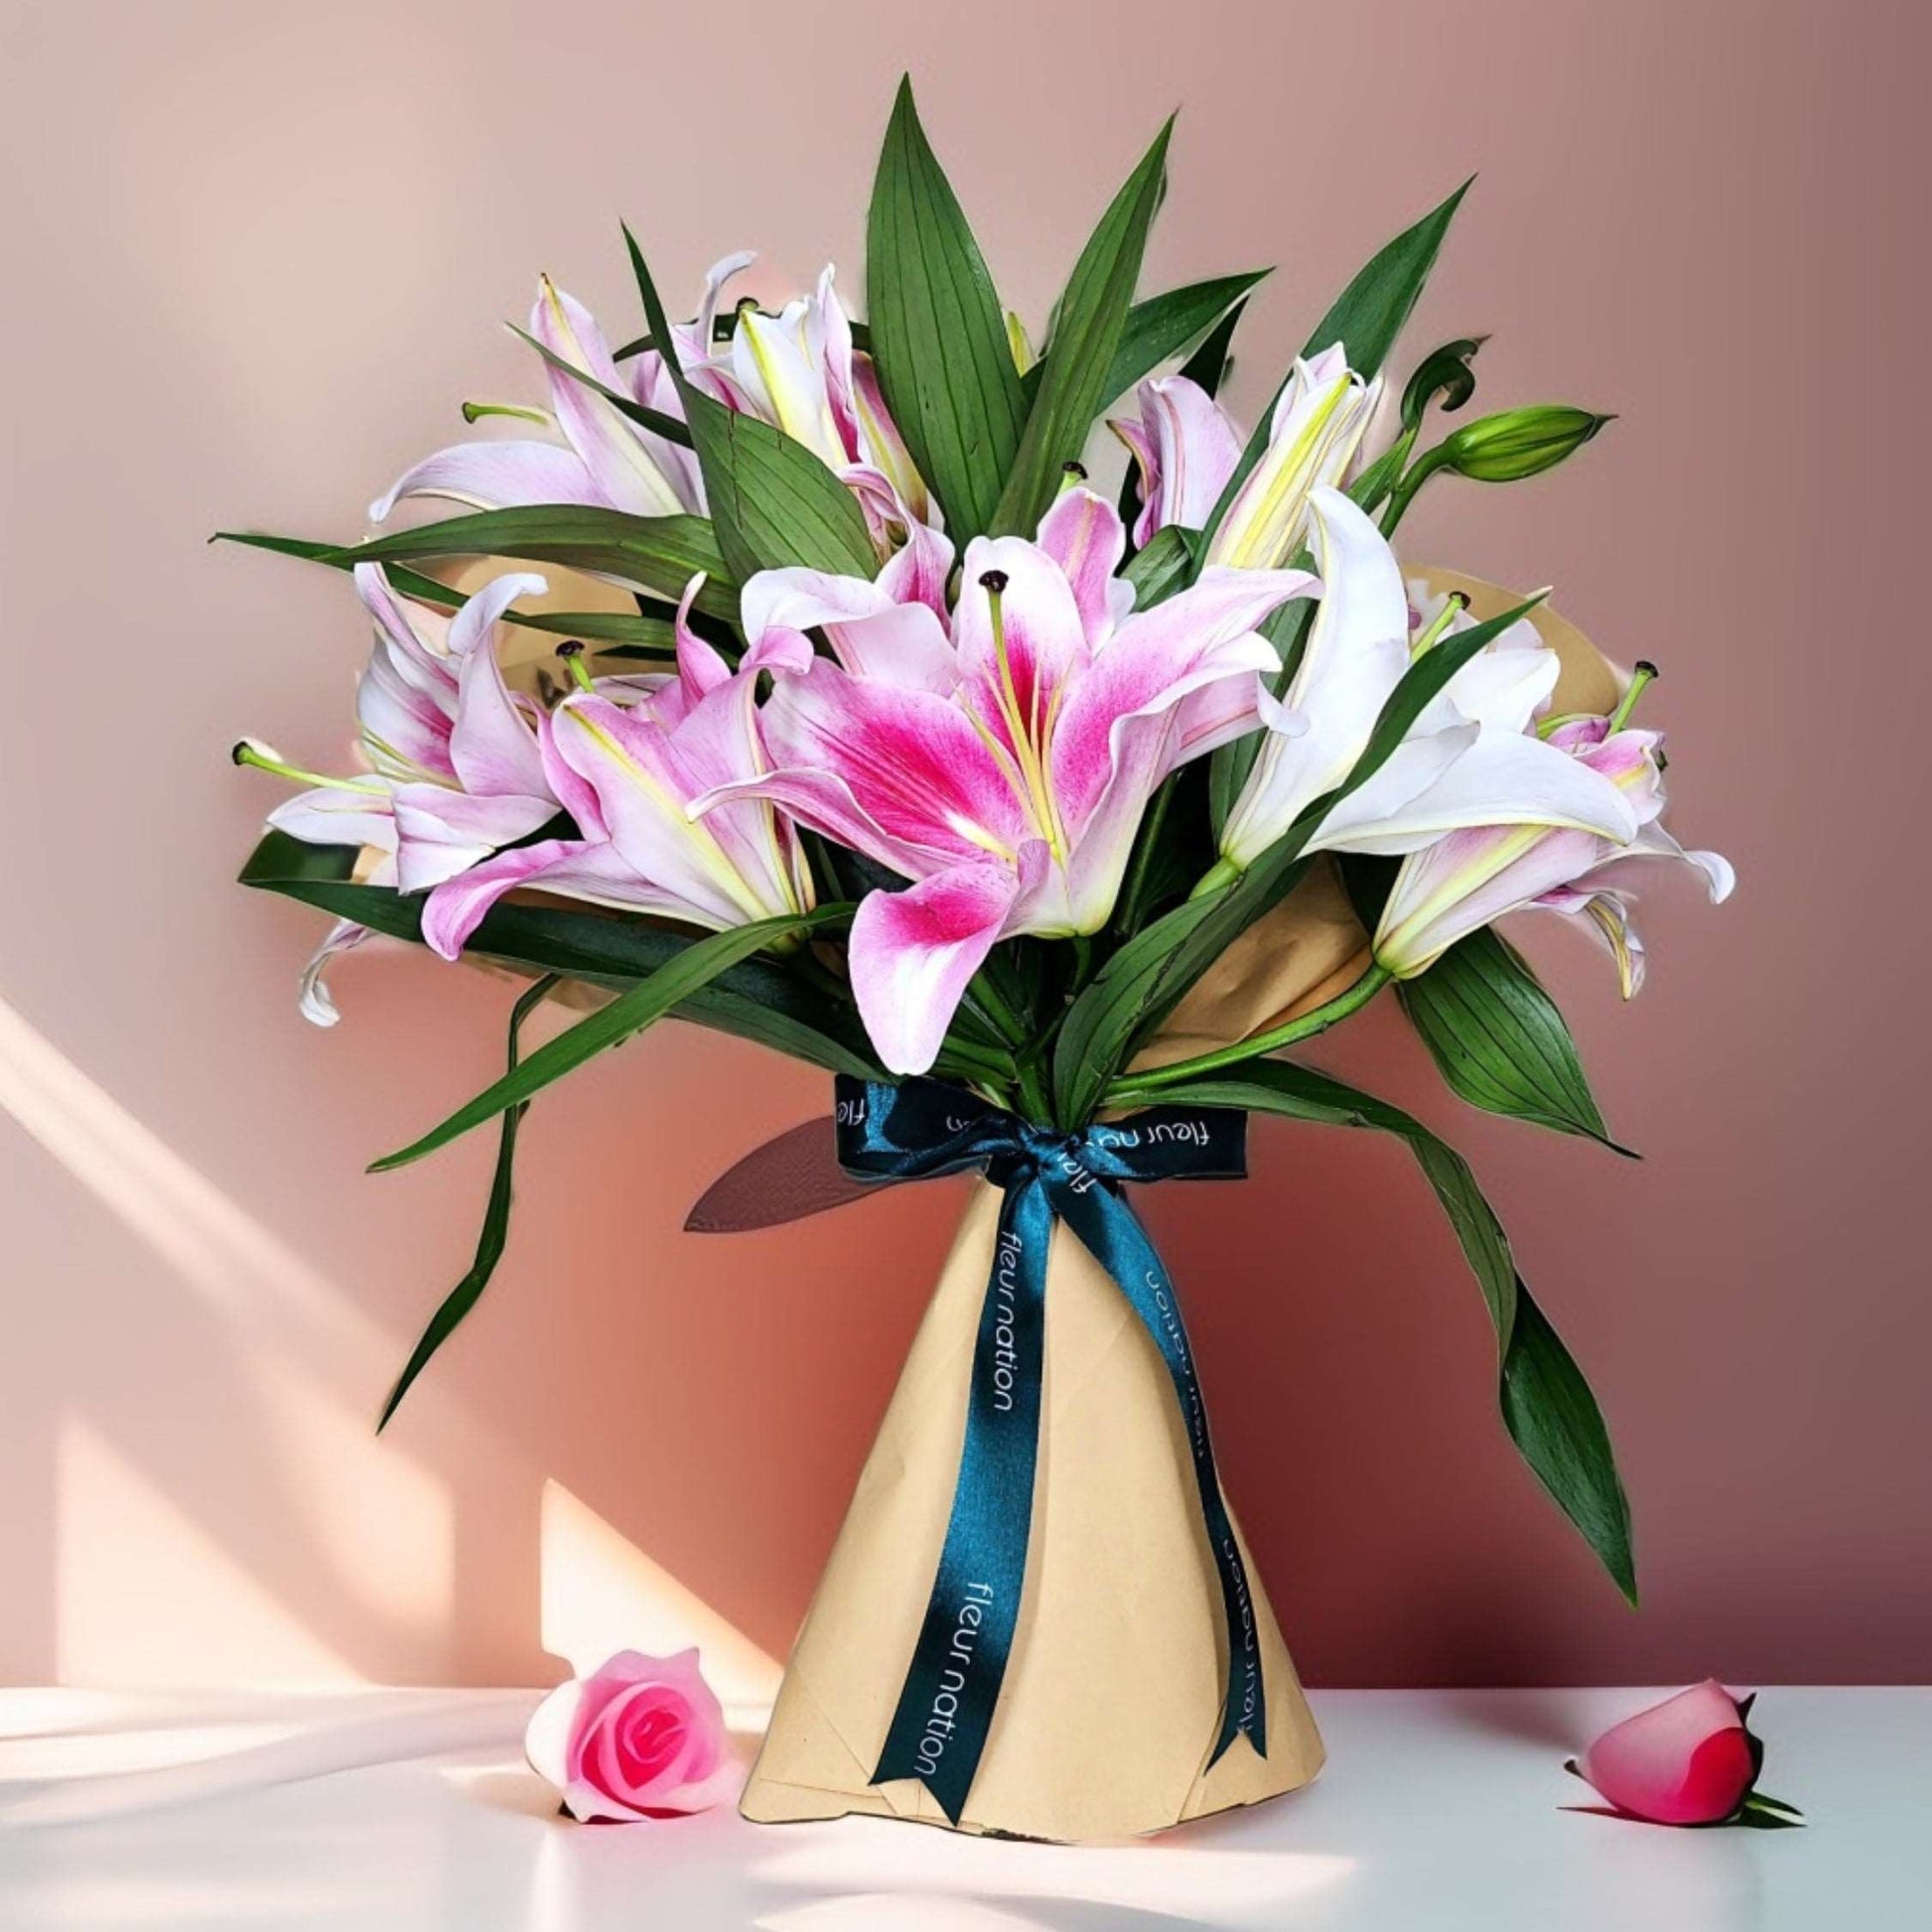 Lilibeth - Pink Lily Bouquet - Fleur Nation - flowers, chocolates, cakes and gifts same day delivery in Dubai